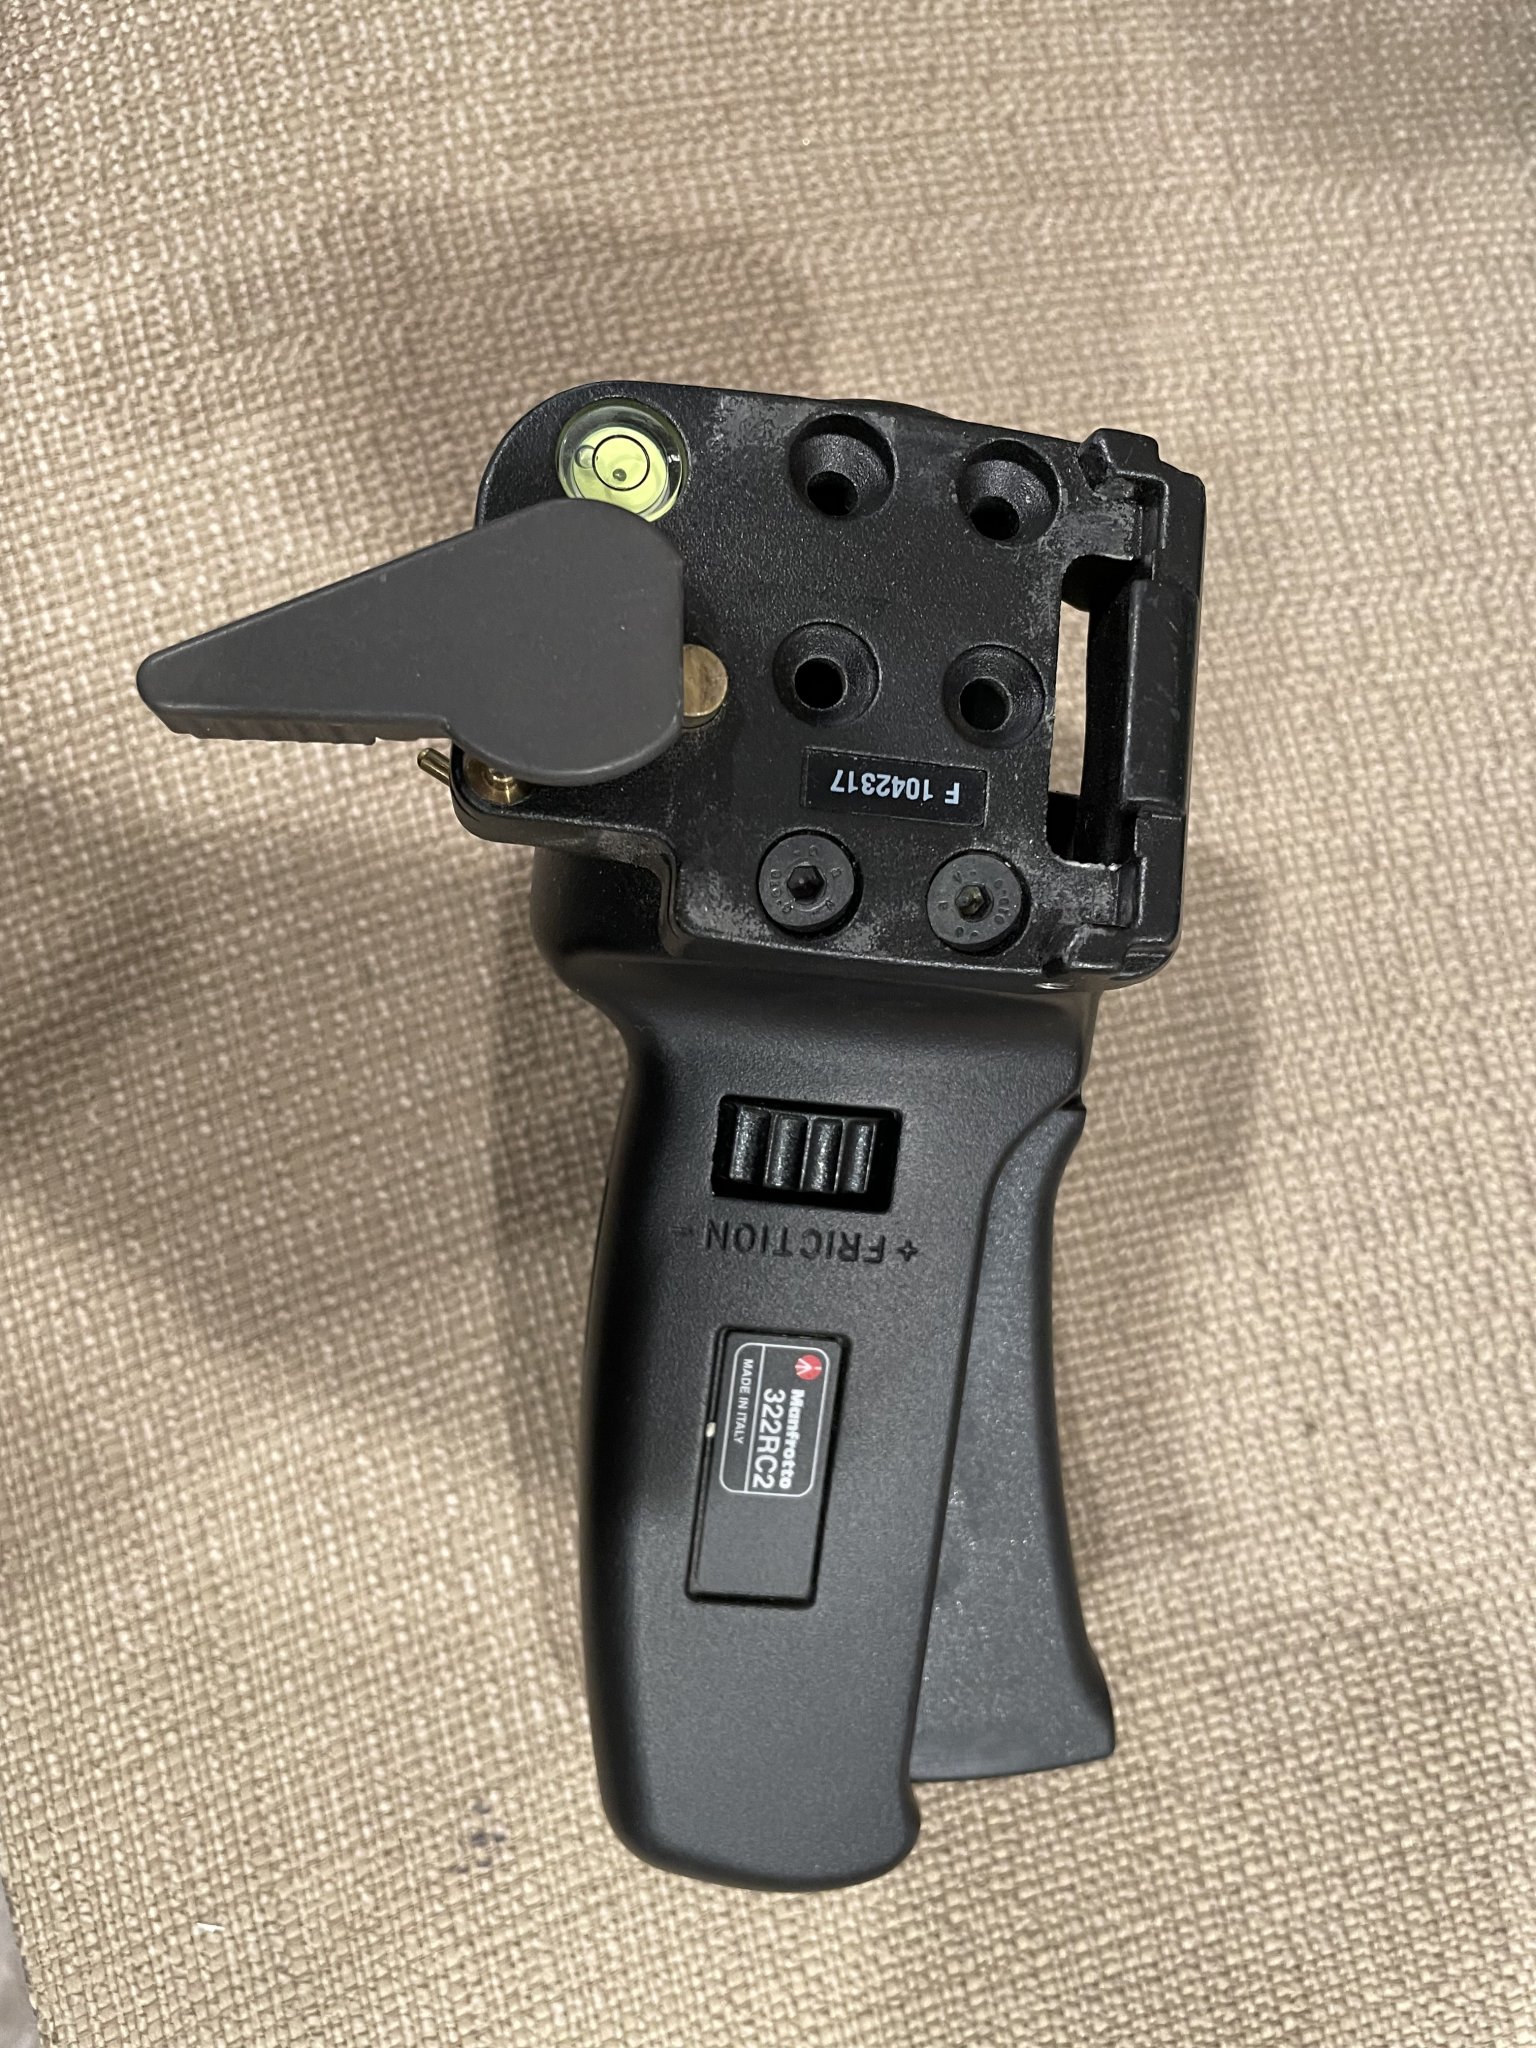 Manfrotto Top.jpg